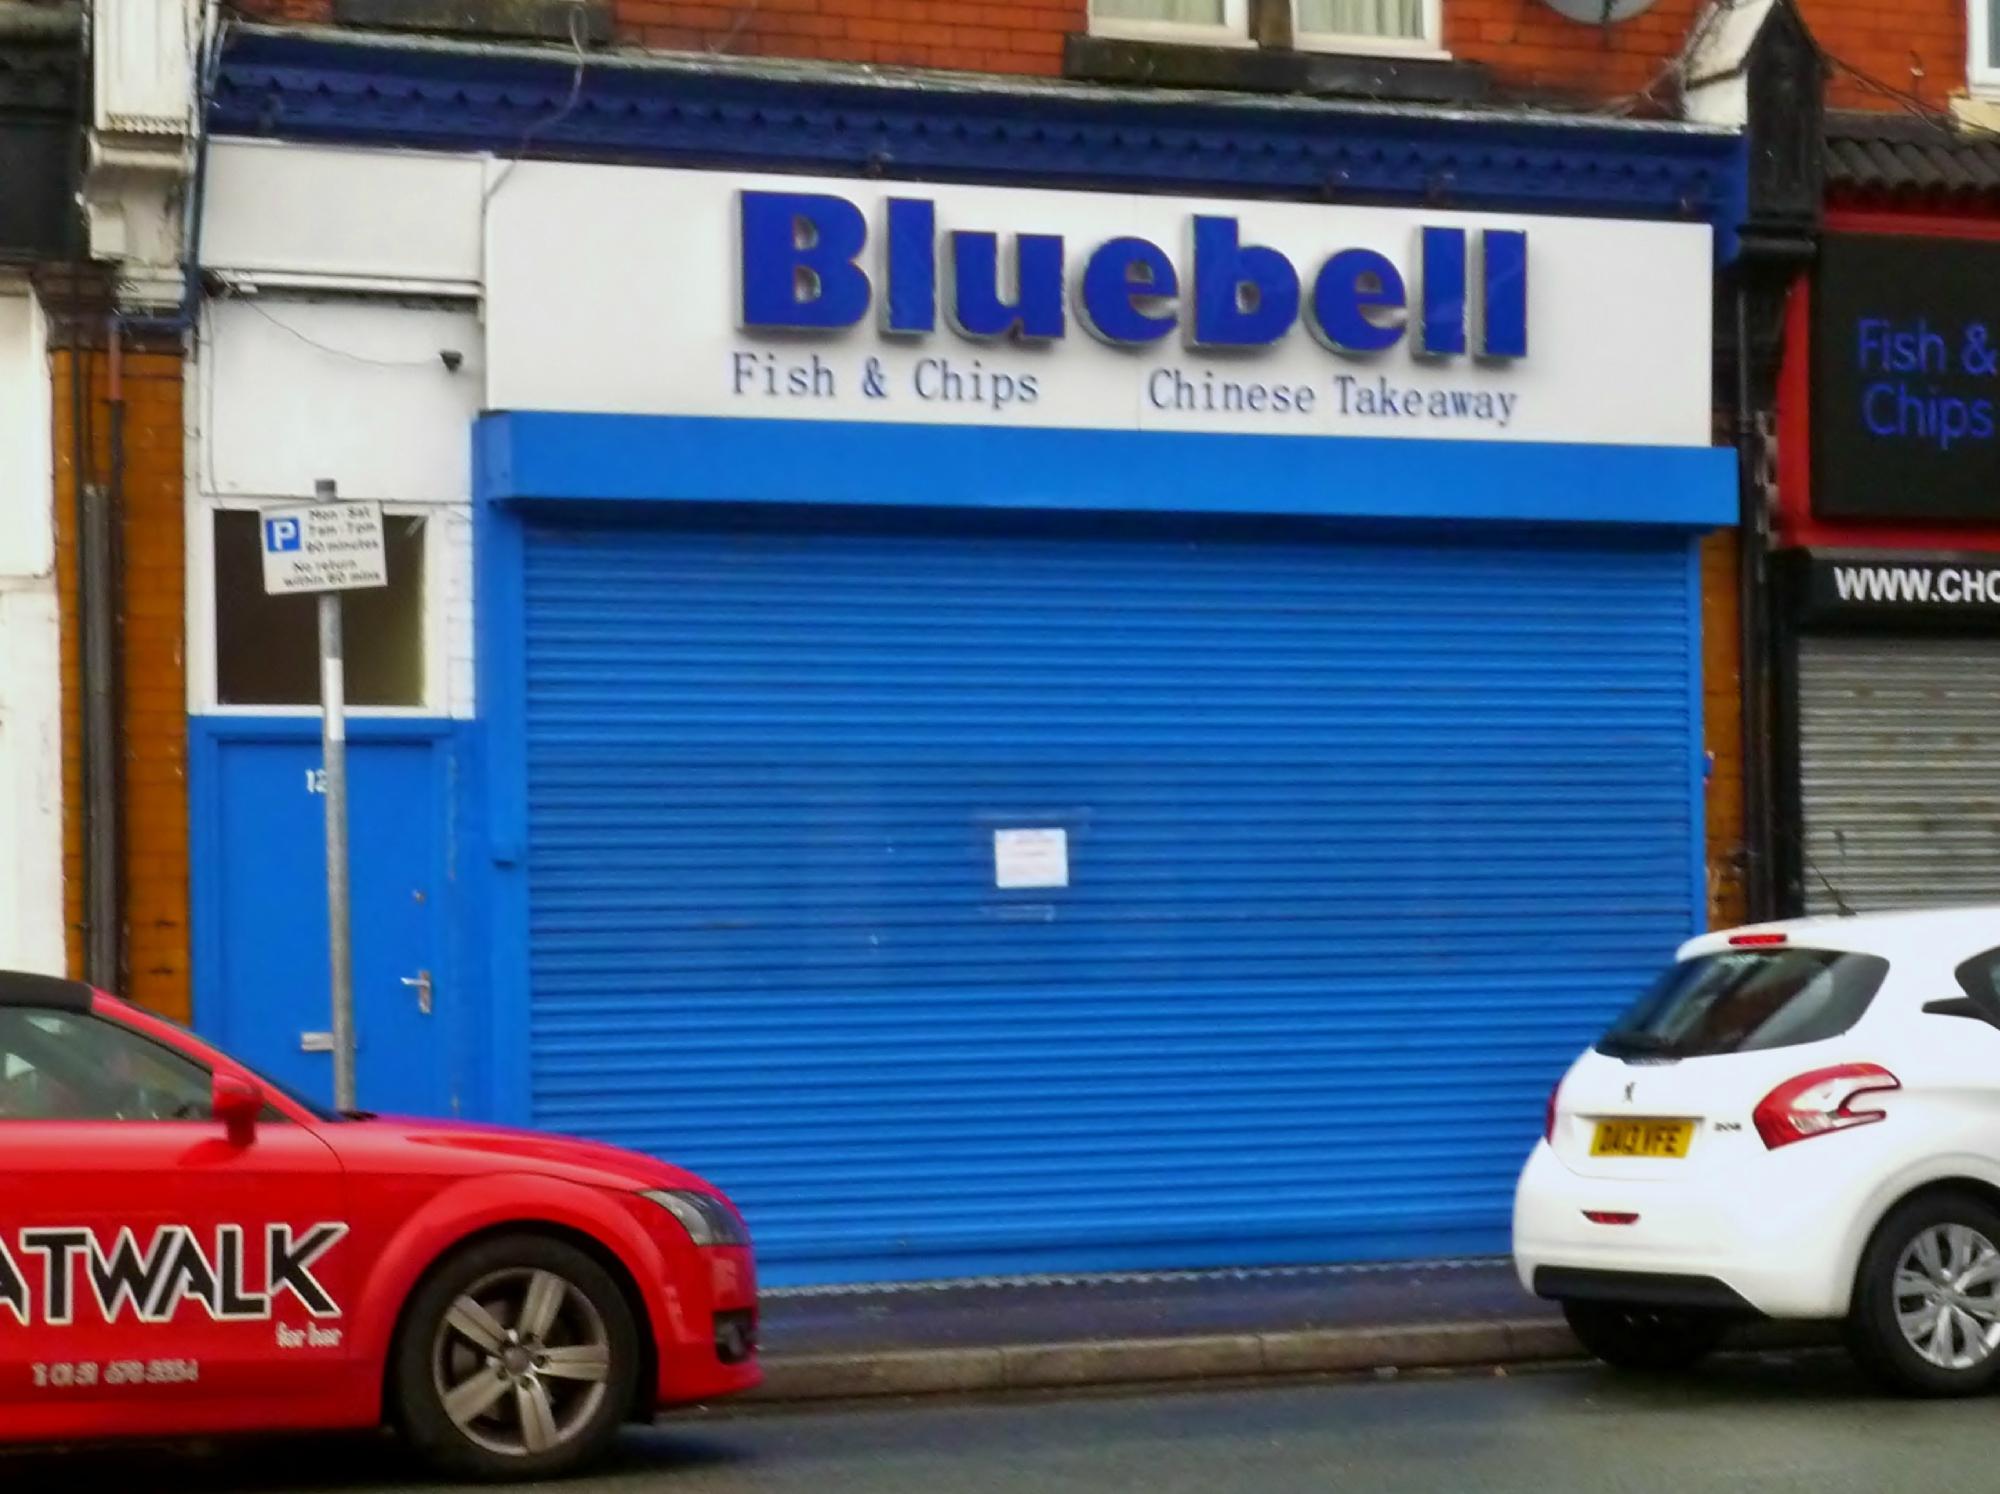 BLUEBELL Chinese Takeaway